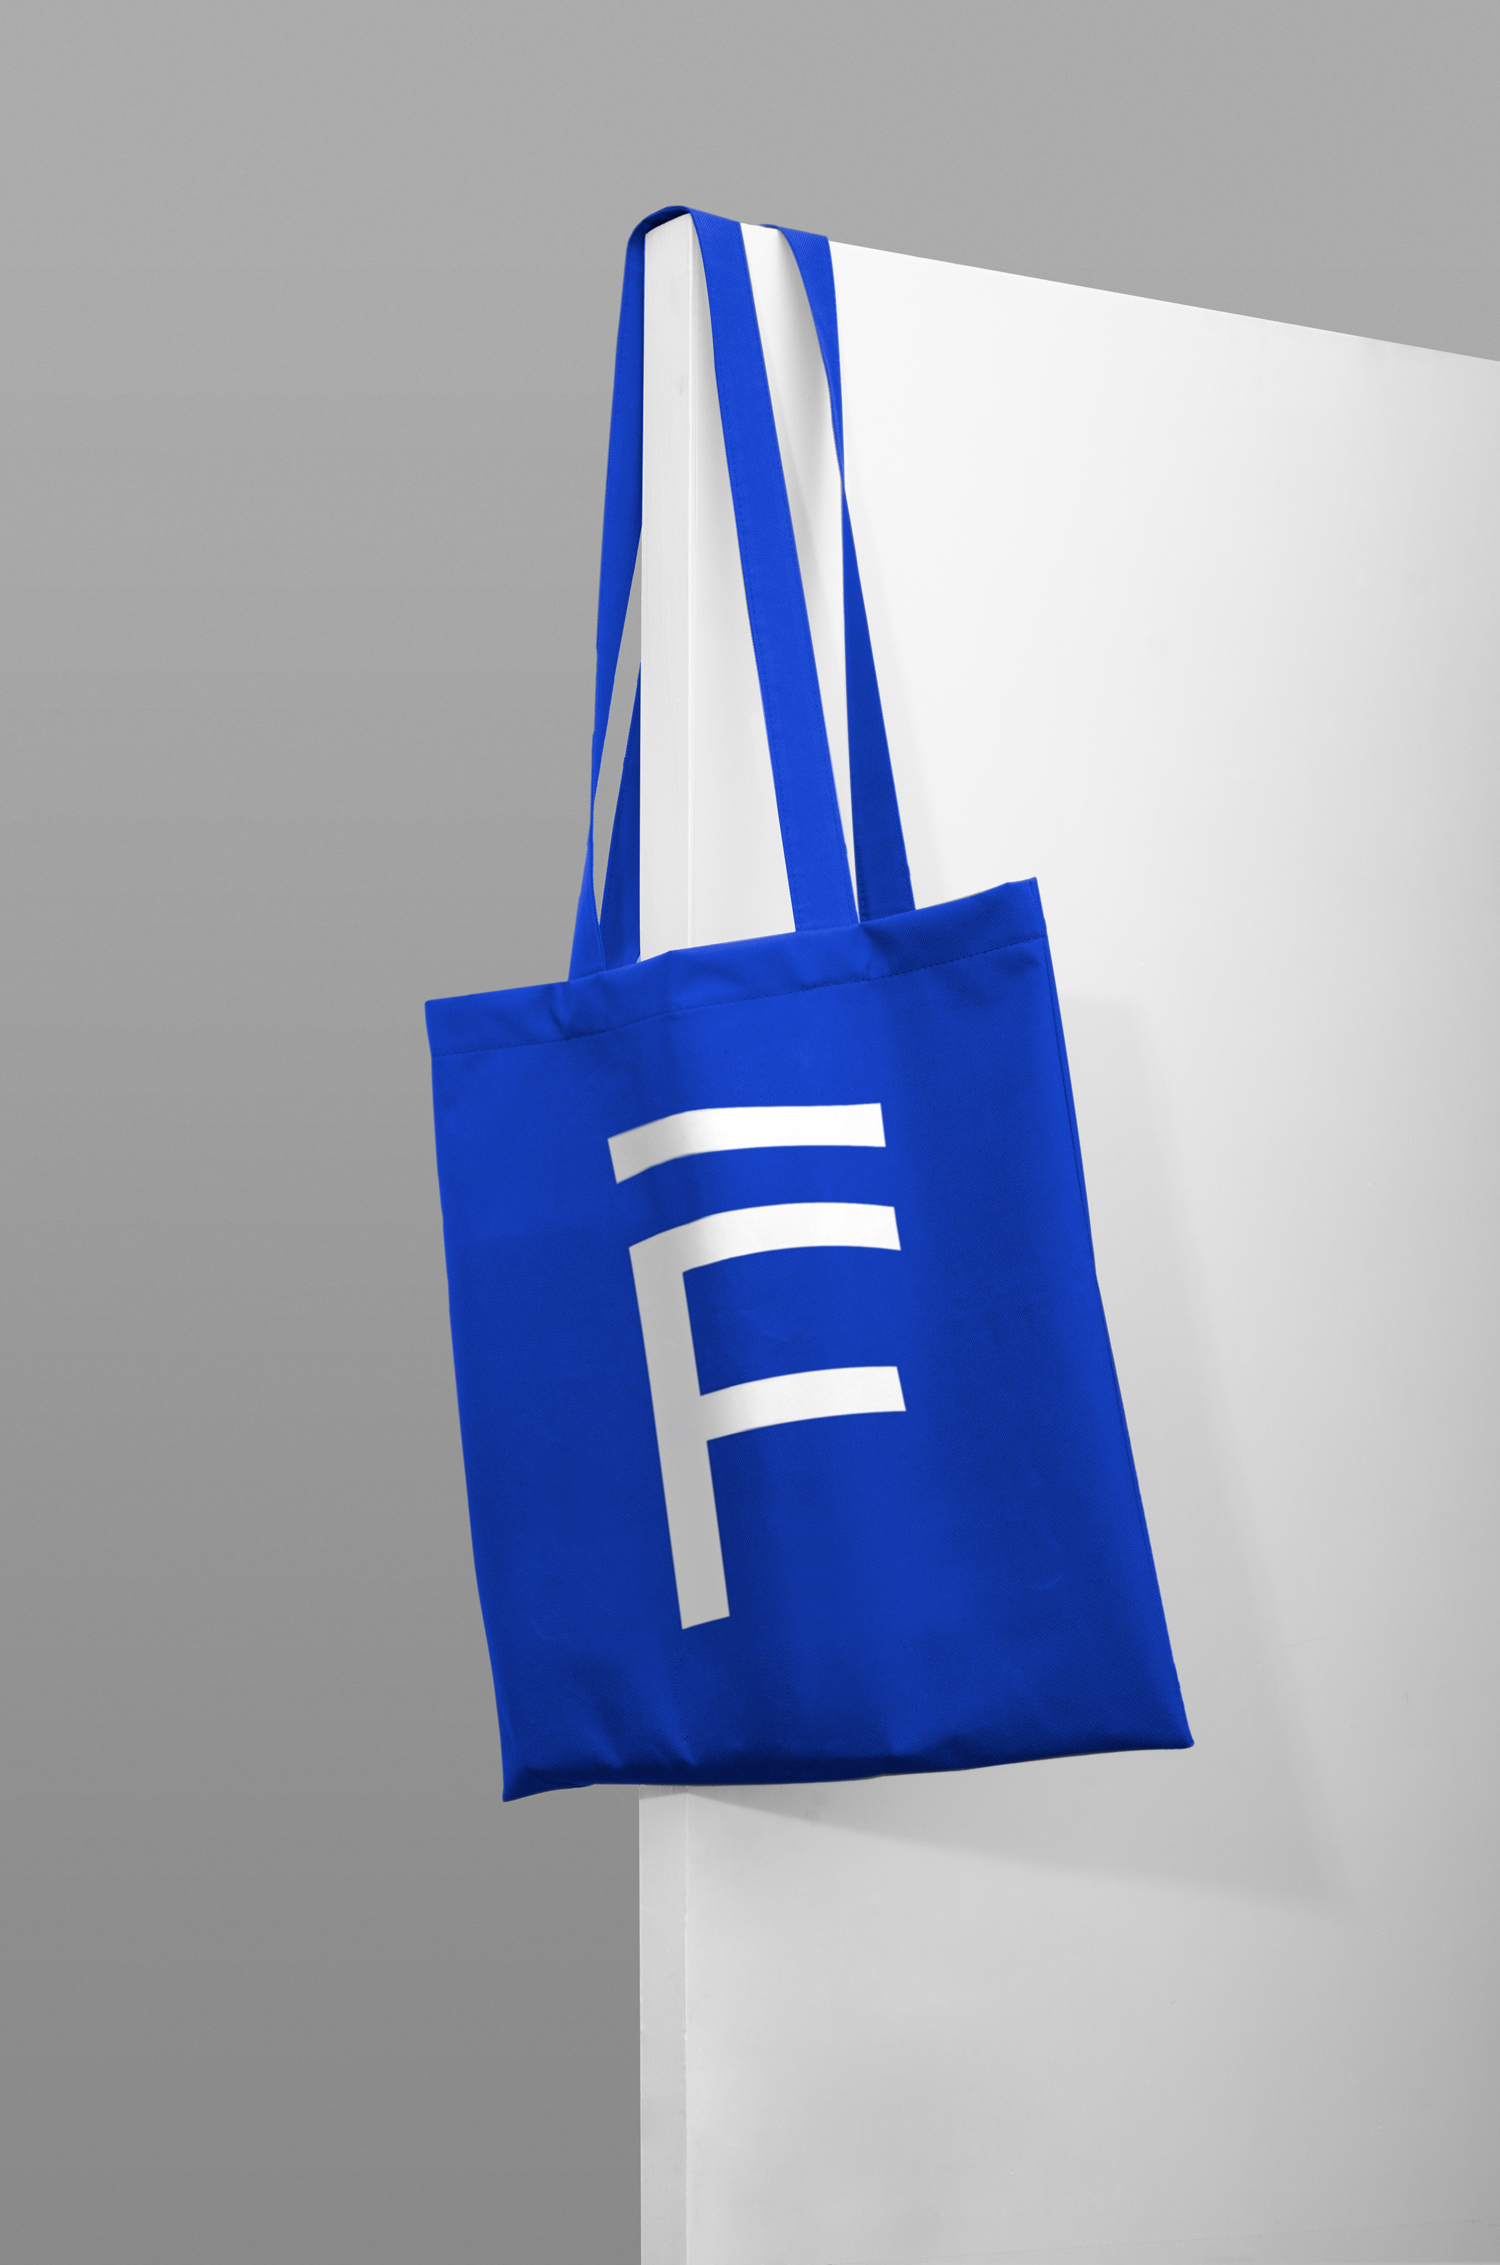 Brand identity and tote bag for UK based Fathom Architects by dn&co.